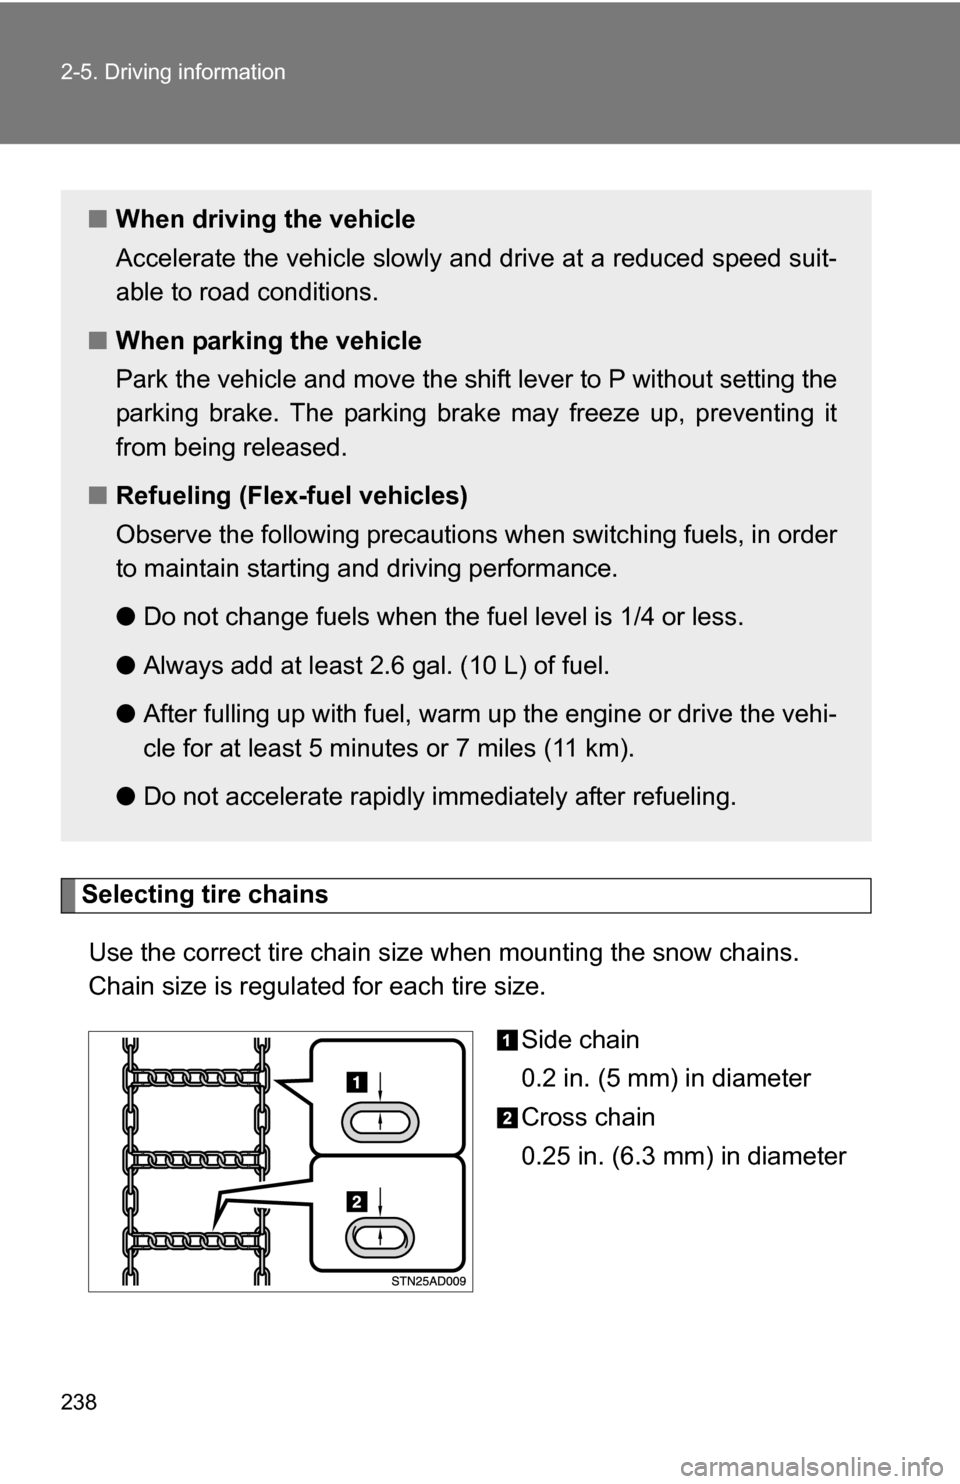 TOYOTA SEQUOIA 2009 2.G Owners Manual 238 2-5. Driving information
Selecting tire chainsUse the correct tire chain size  when mounting the snow chains.
Chain size is regulated for each tire size.
Side chain
0.2 in. (5 mm) in diameter
Cros